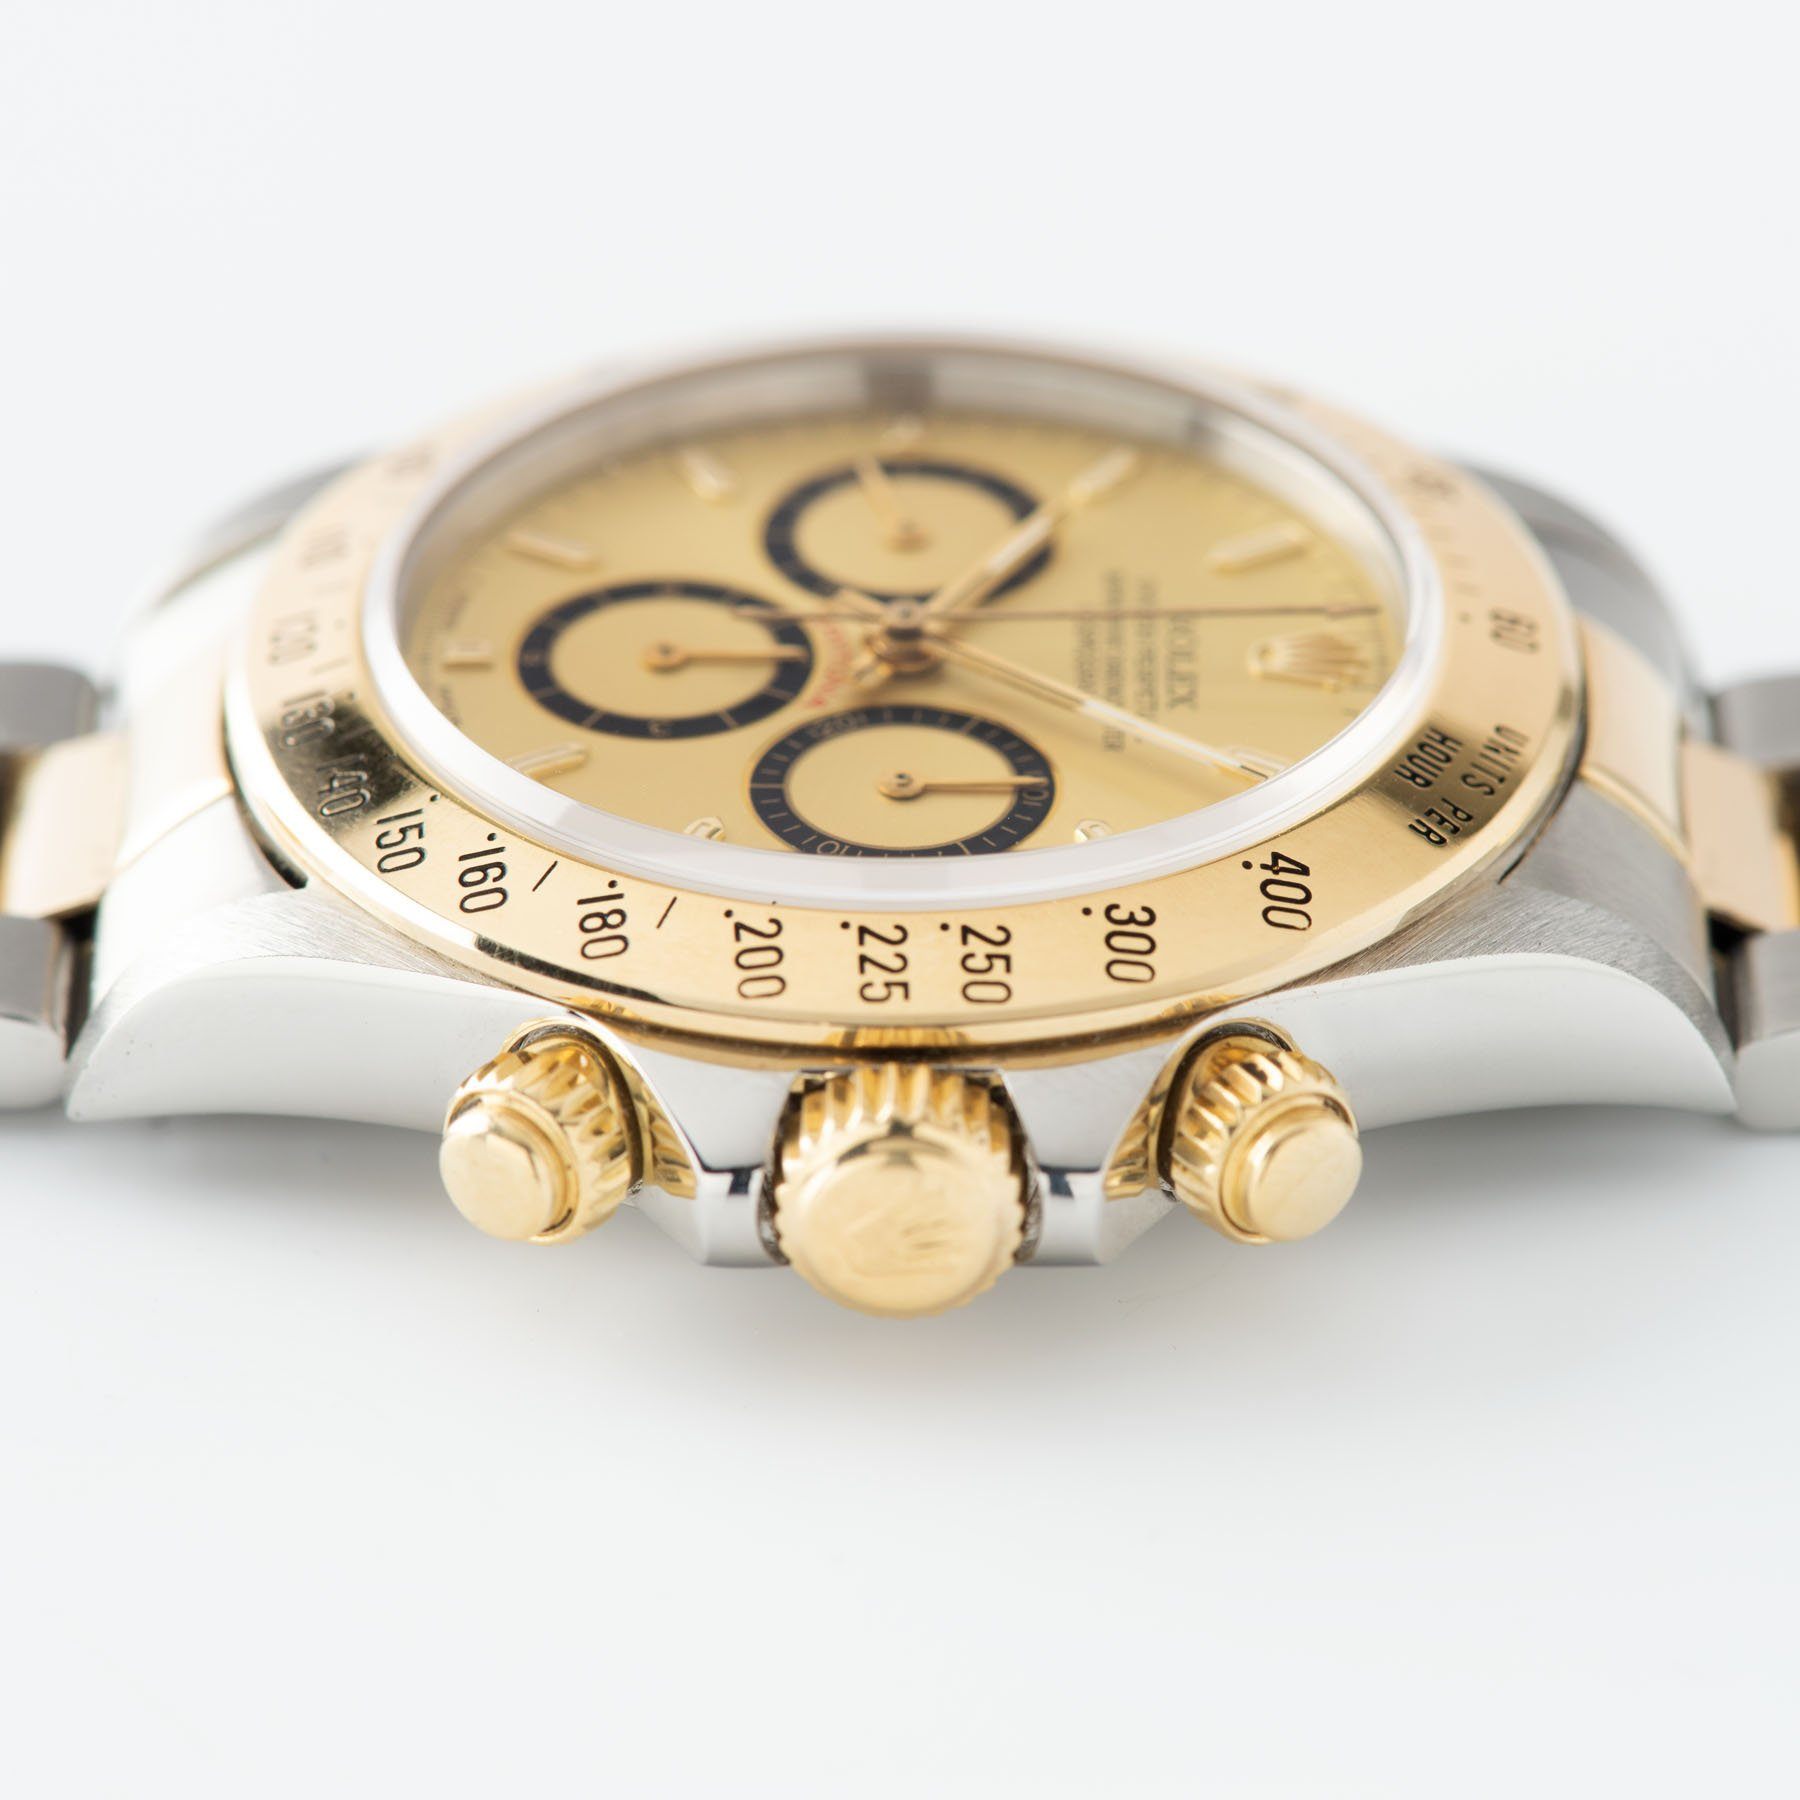 Rolex Daytona 16523 Champagne Four Line Dial with Papers